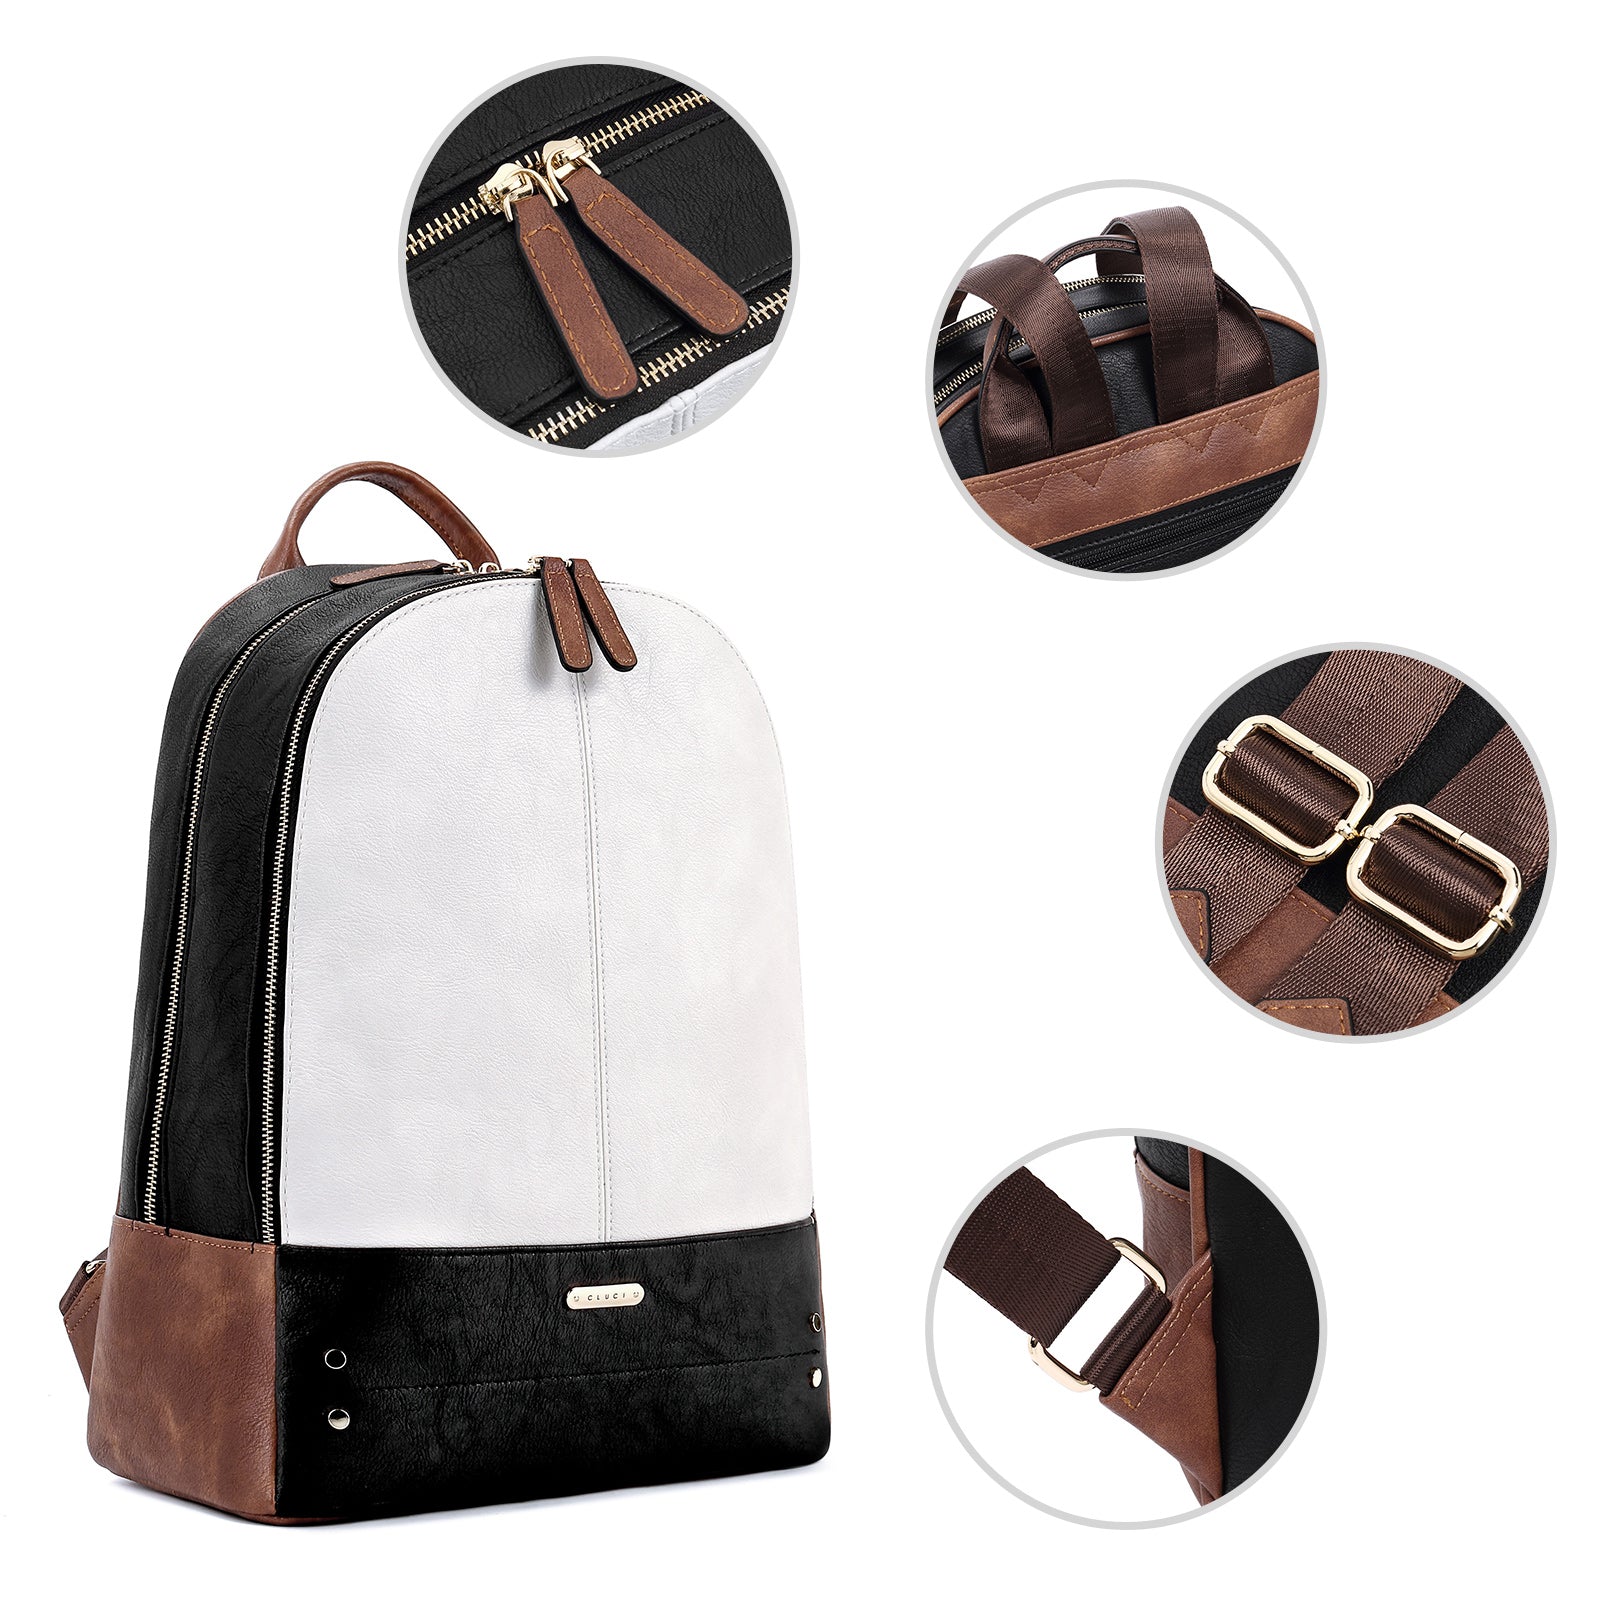 CLUCI Laptop Backpack for Women Leather 15.6 inch Computer Backpack Travel Business Vintage Large College Bag